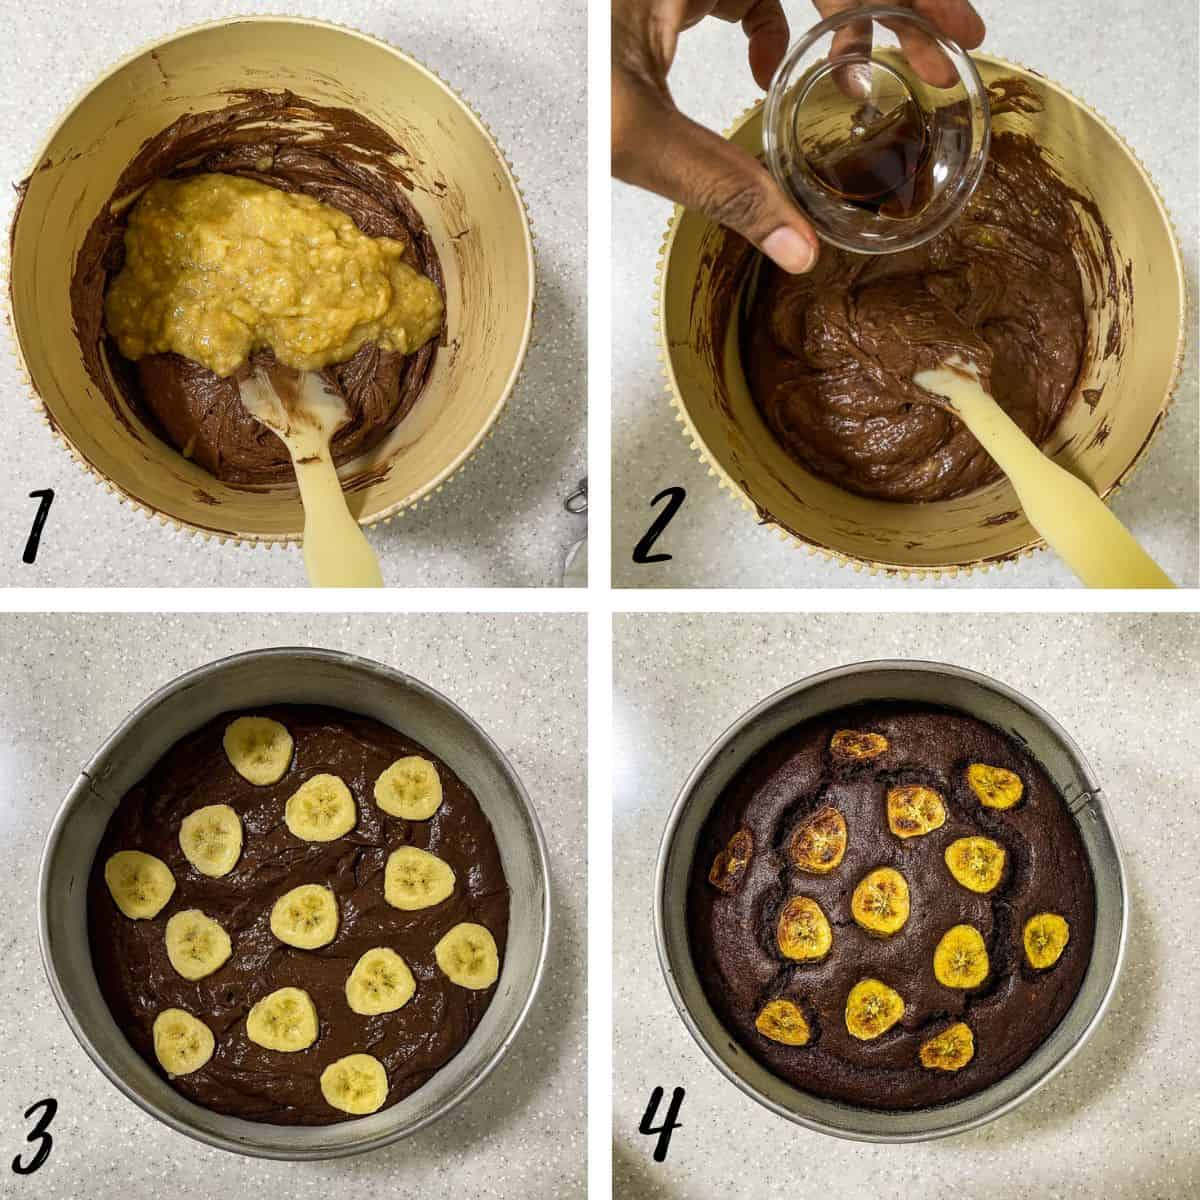 A poster of 4 images showing how to add mashed bananas into chocolate cake batter and banana slices on a chocolate cake.